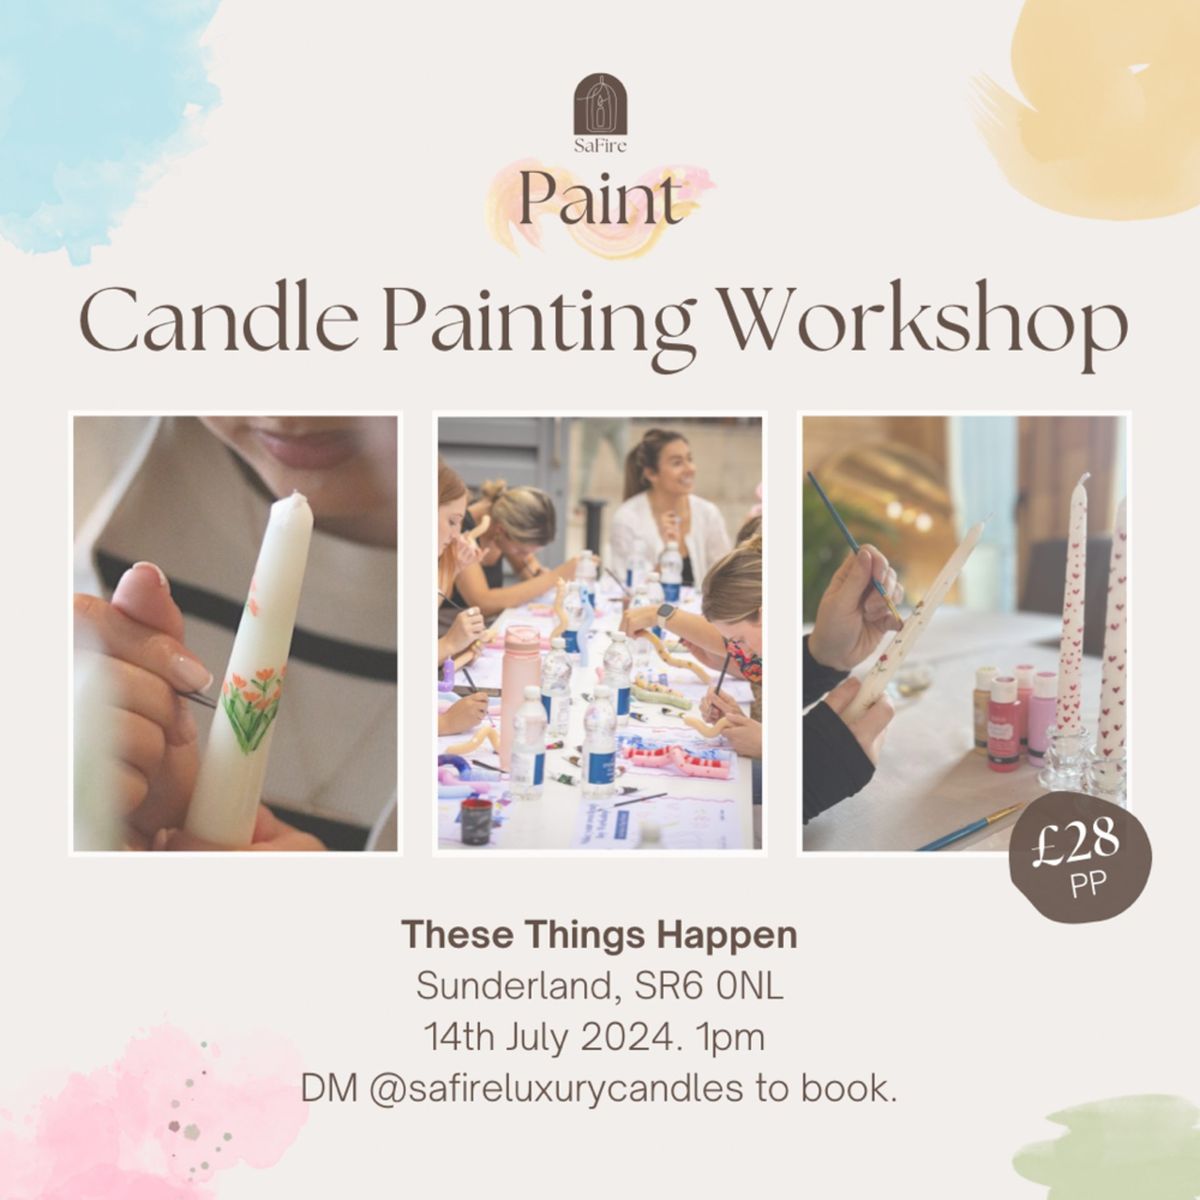 SaFire Candle Painting Workshop